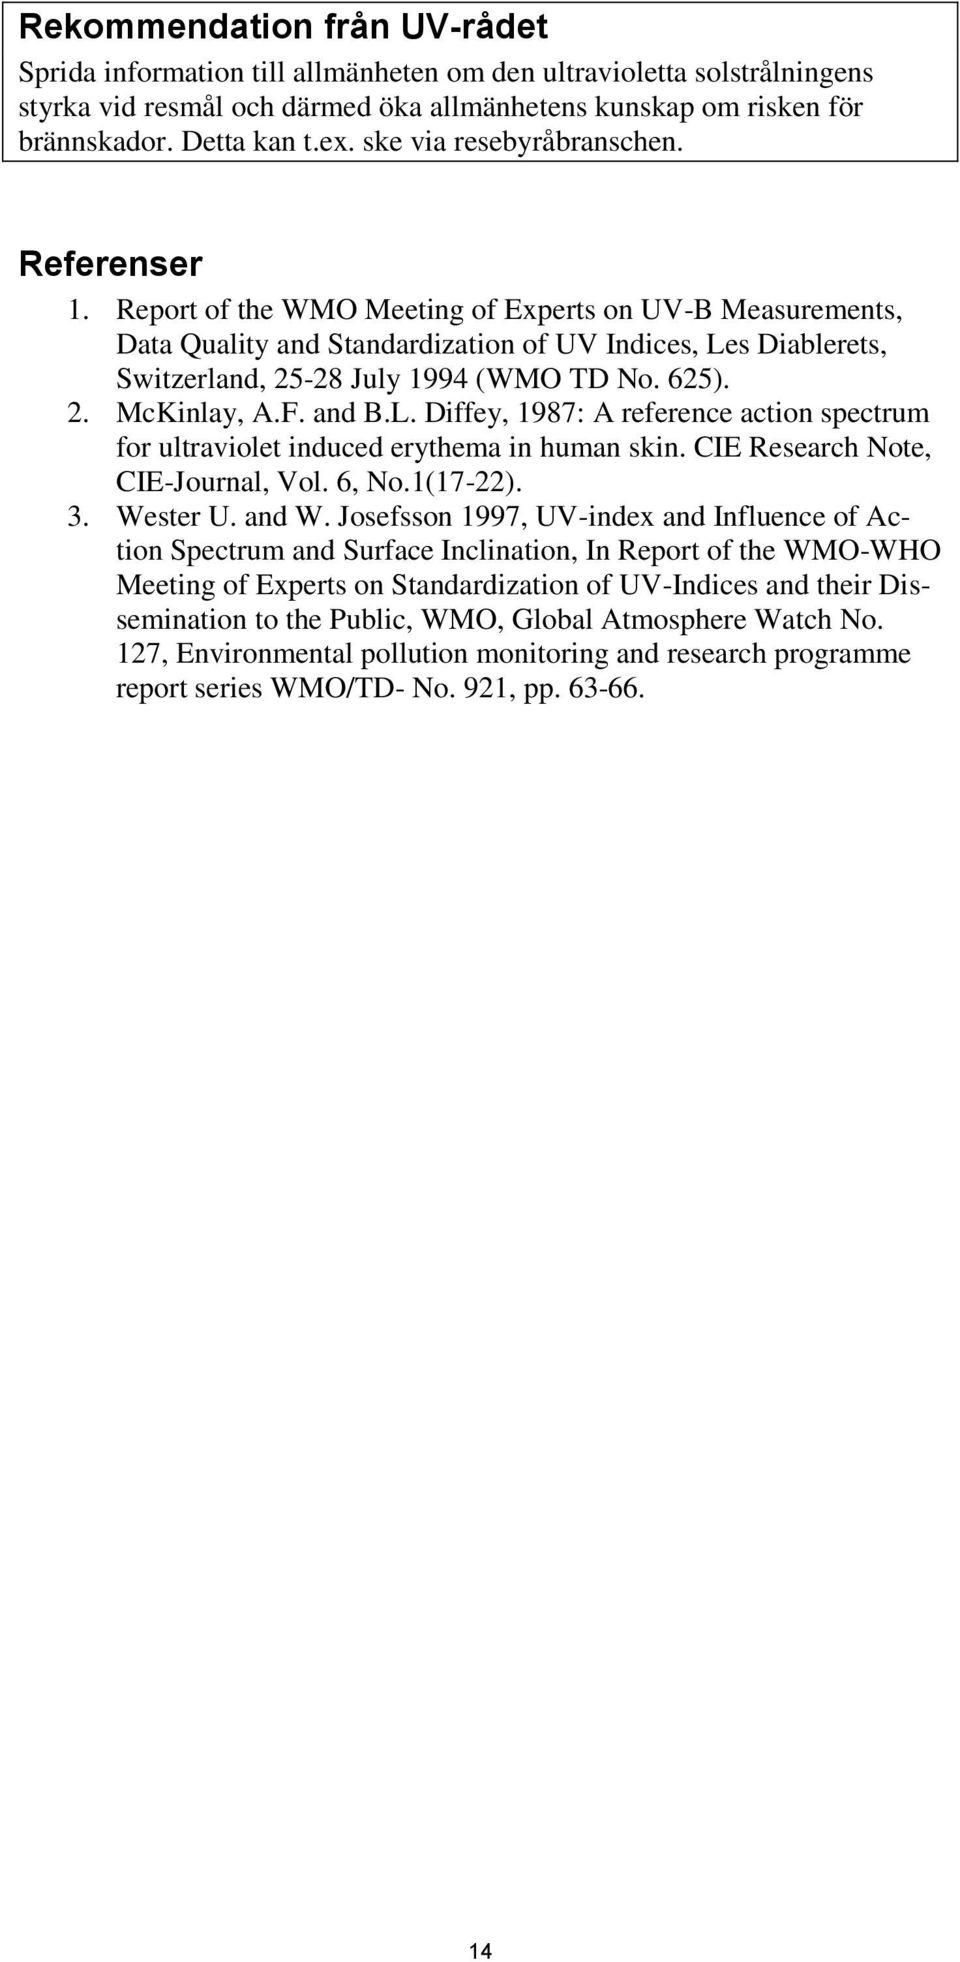 Report of the WMO Meeting of Experts on UV-B Measurements, Data Quality and Standardization of UV Indices, Les Diablerets, Switzerland, 25-28 July 1994 (WMO TD No. 625). 2. McKinlay, A.F. and B.L. Diffey, 1987: A reference action spectrum for ultraviolet induced erythema in human skin.